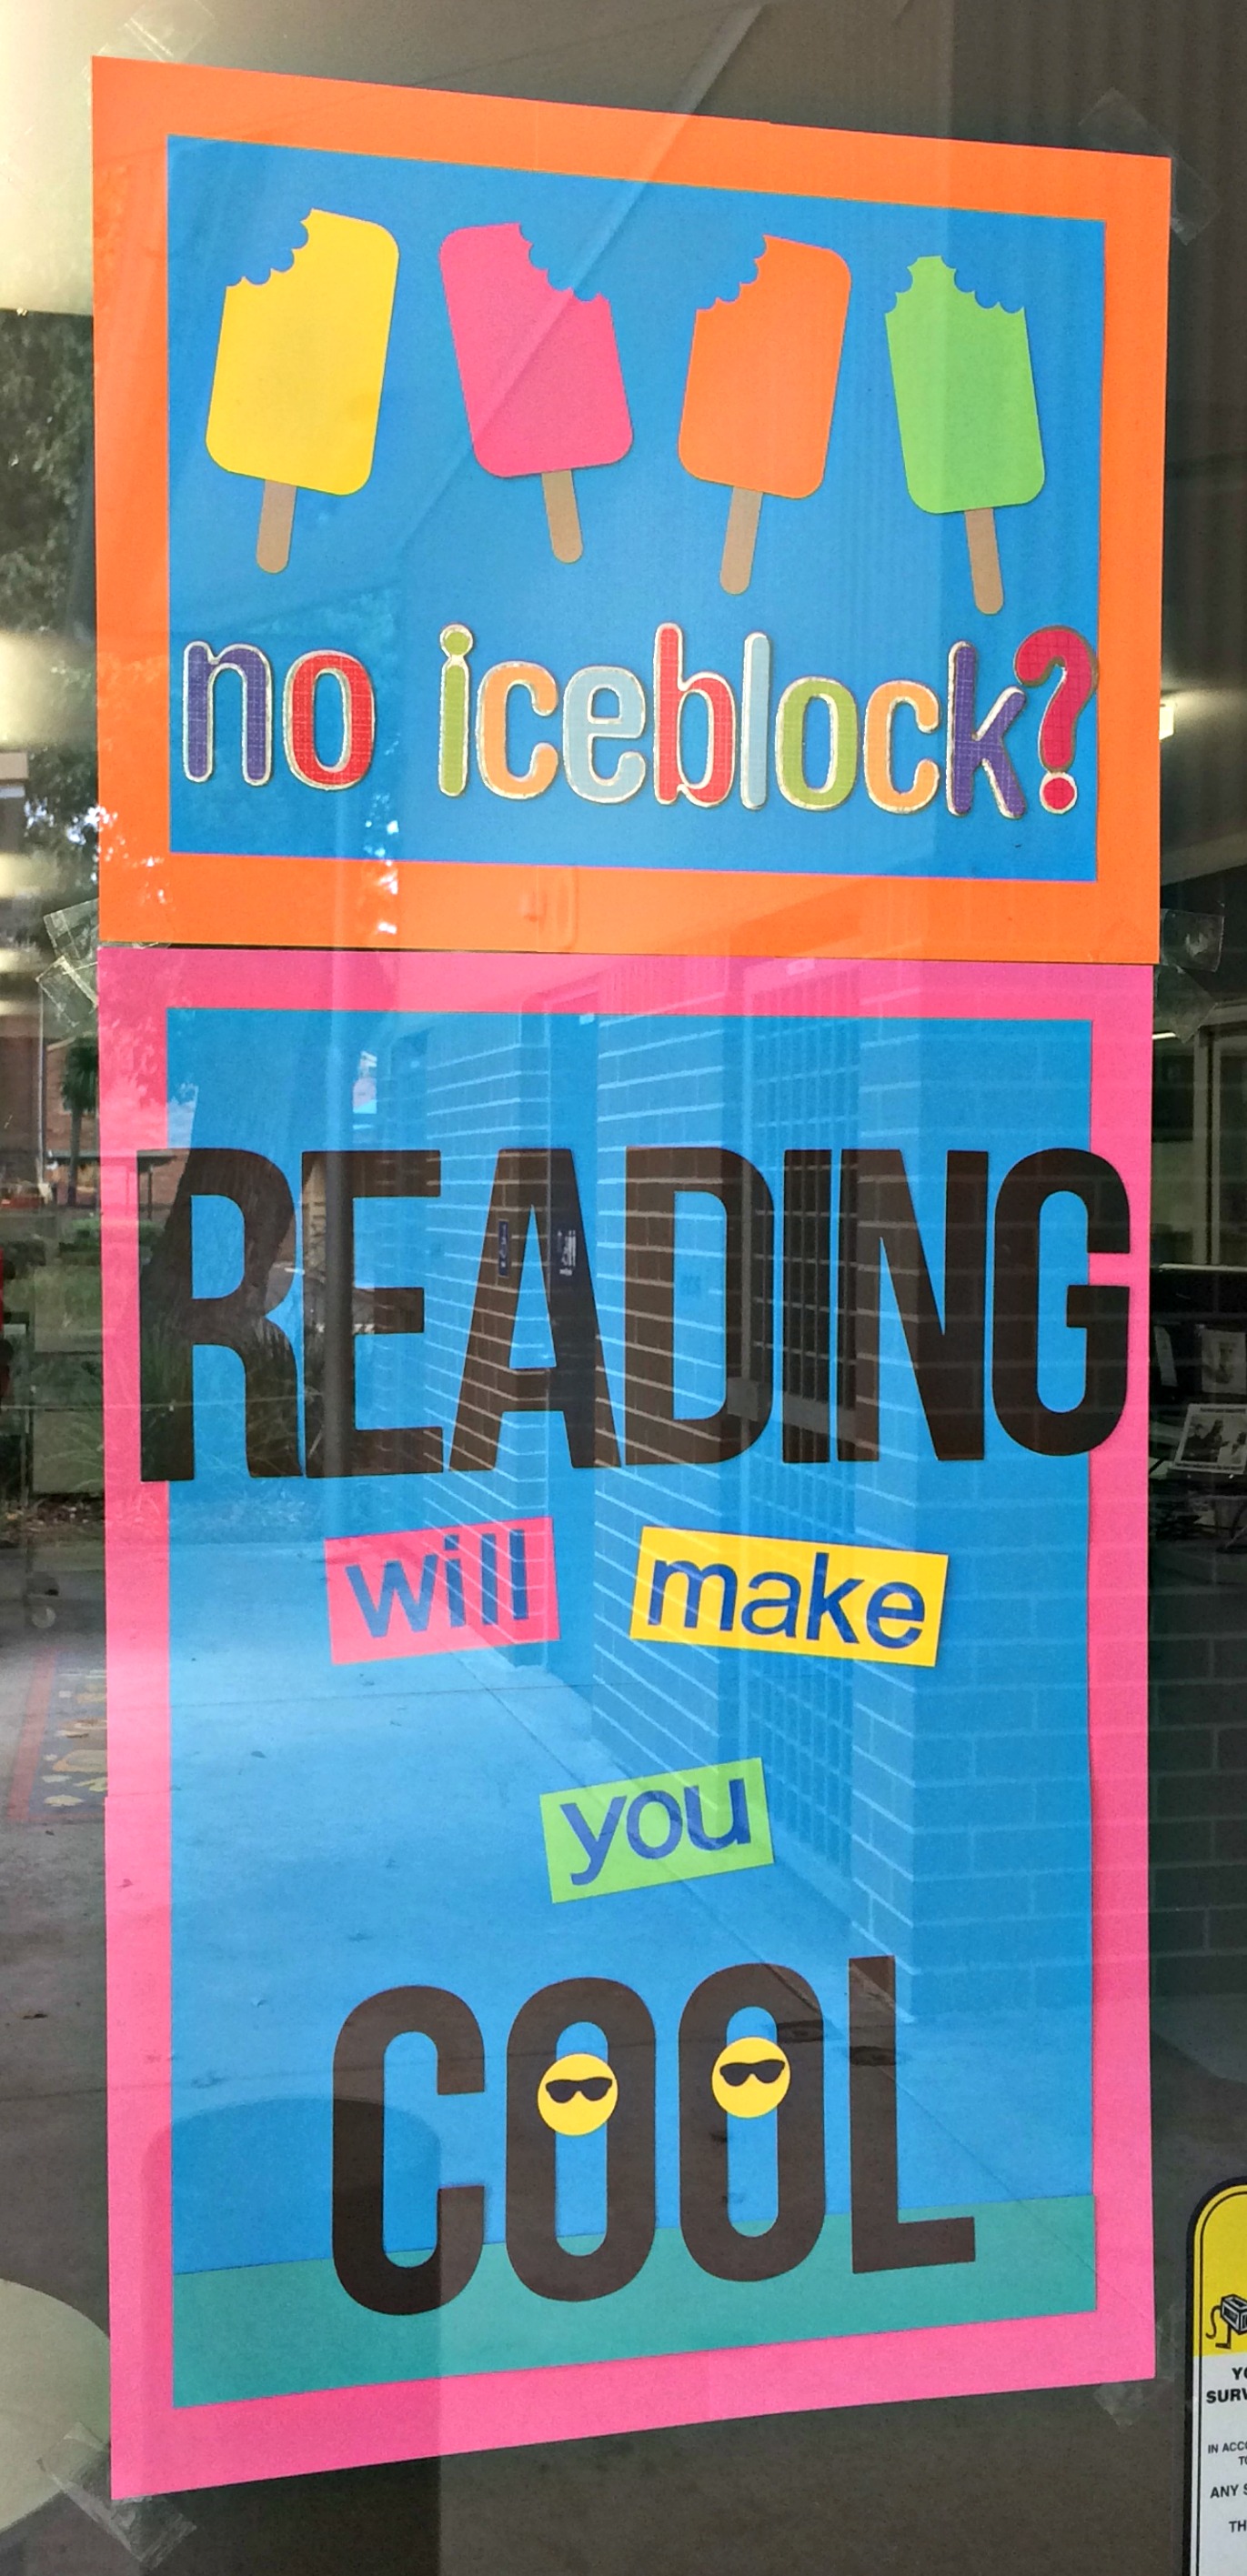 reading will make you cool.jpg